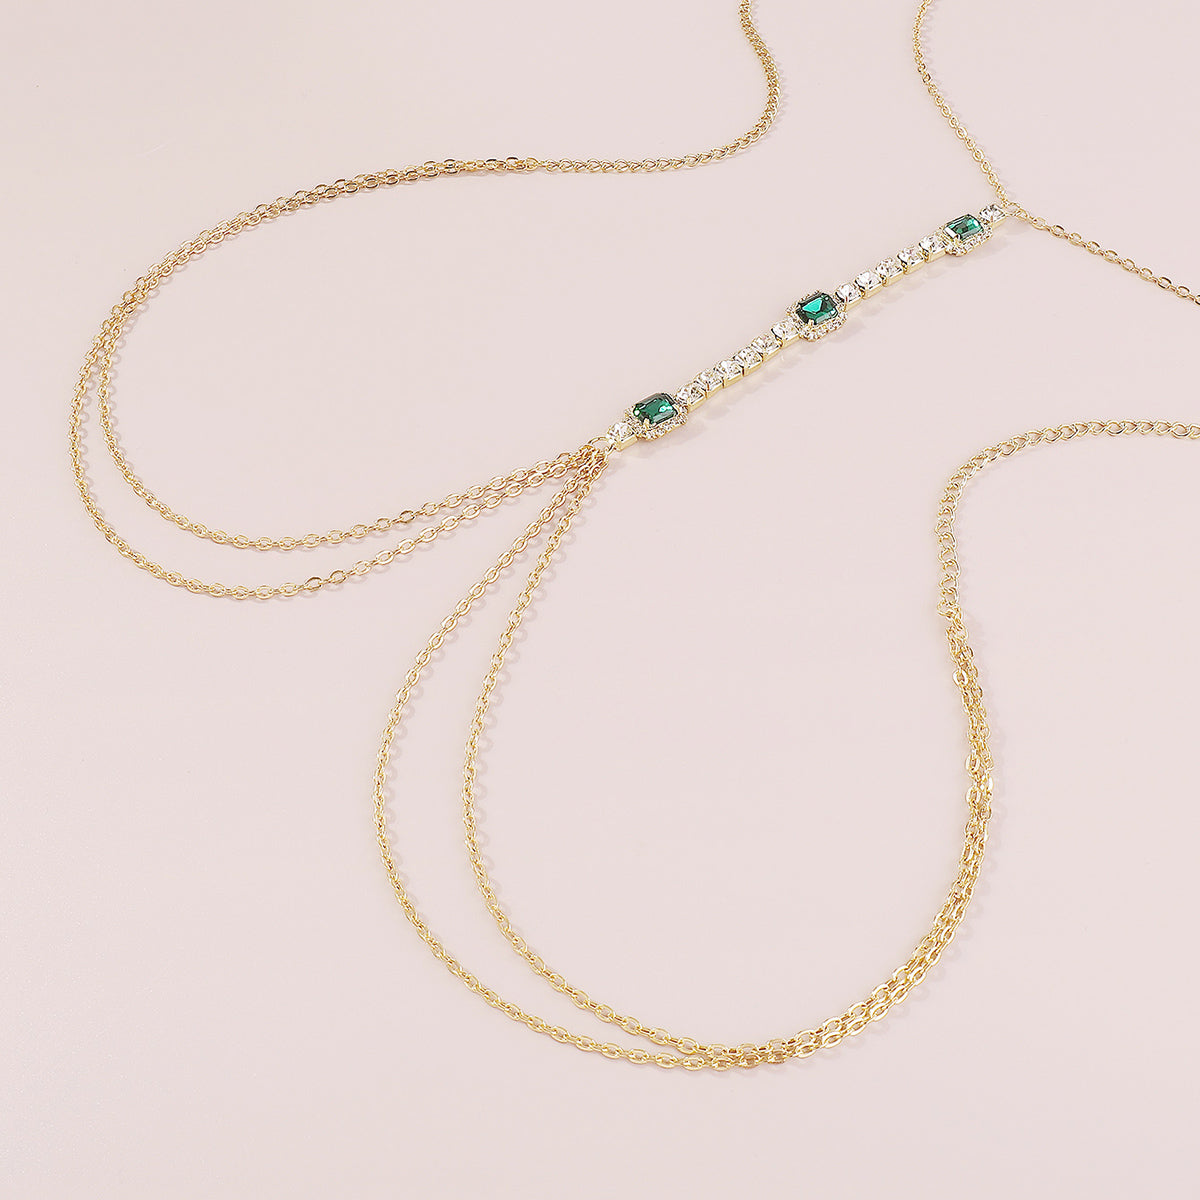 C0480 Large Crystal Neck Body Chain